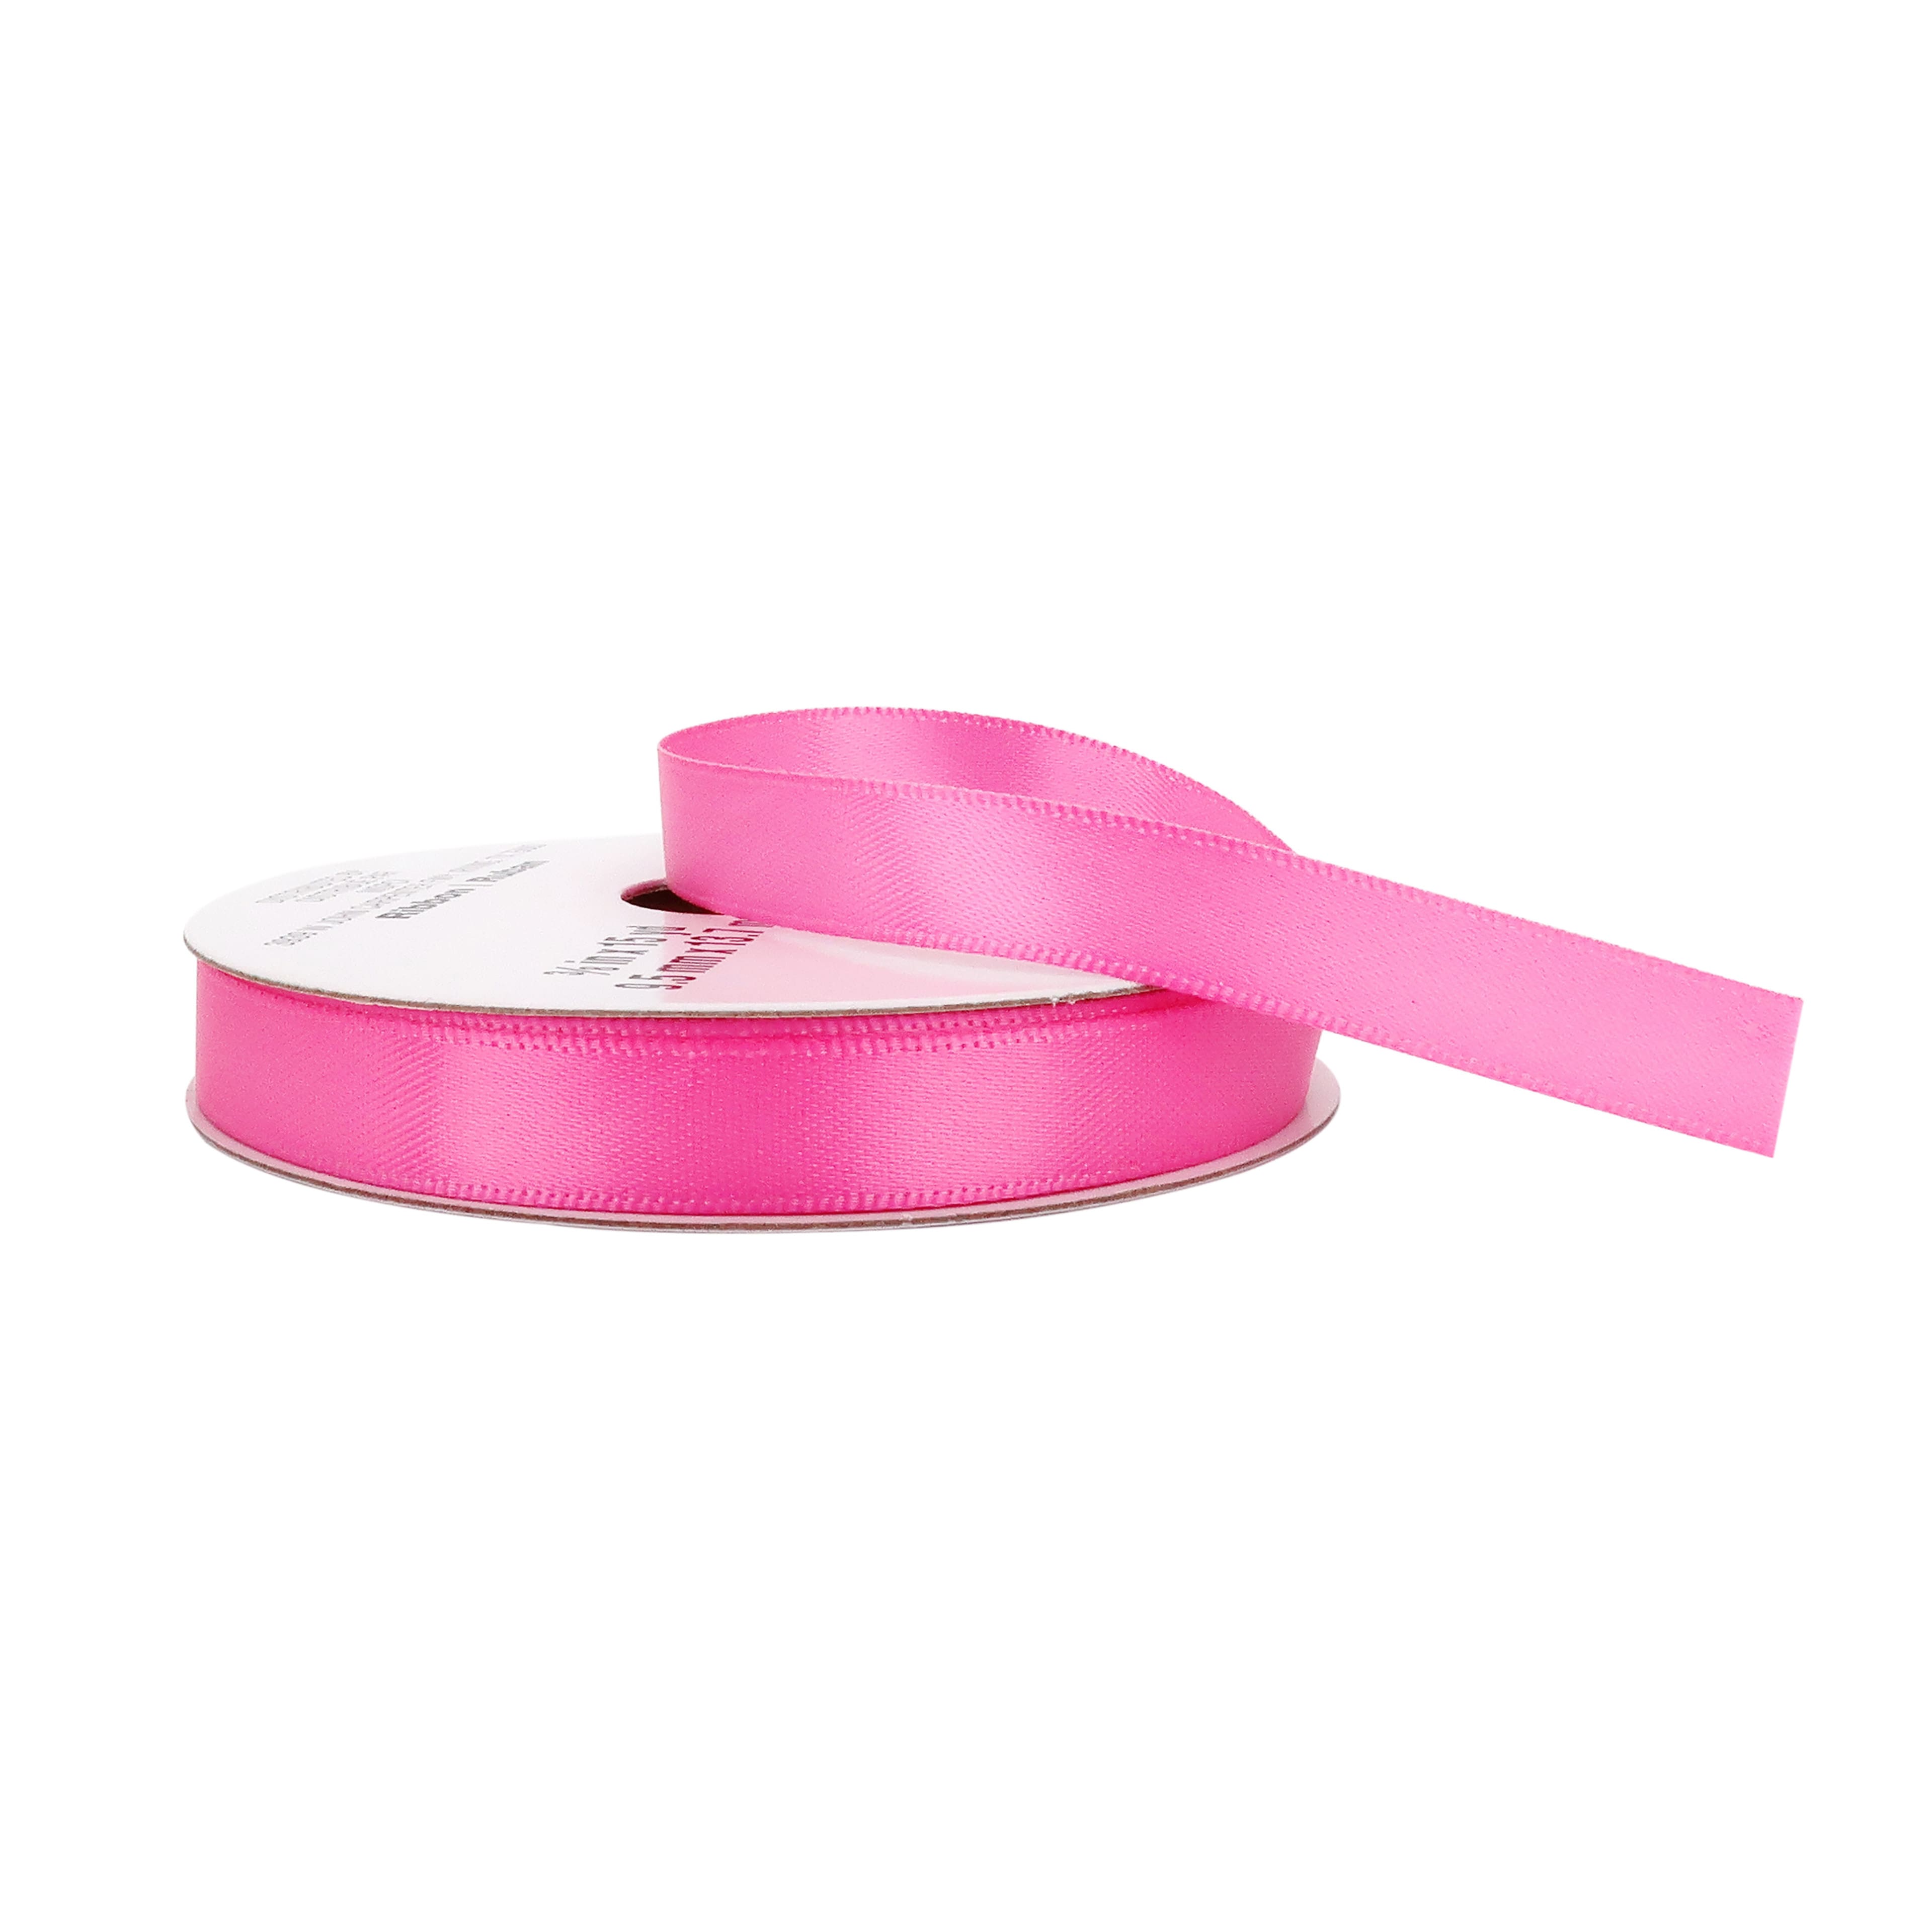 12 Pack: 3/8 Sheer Iridescent Ribbon by Celebrate It® 360°™